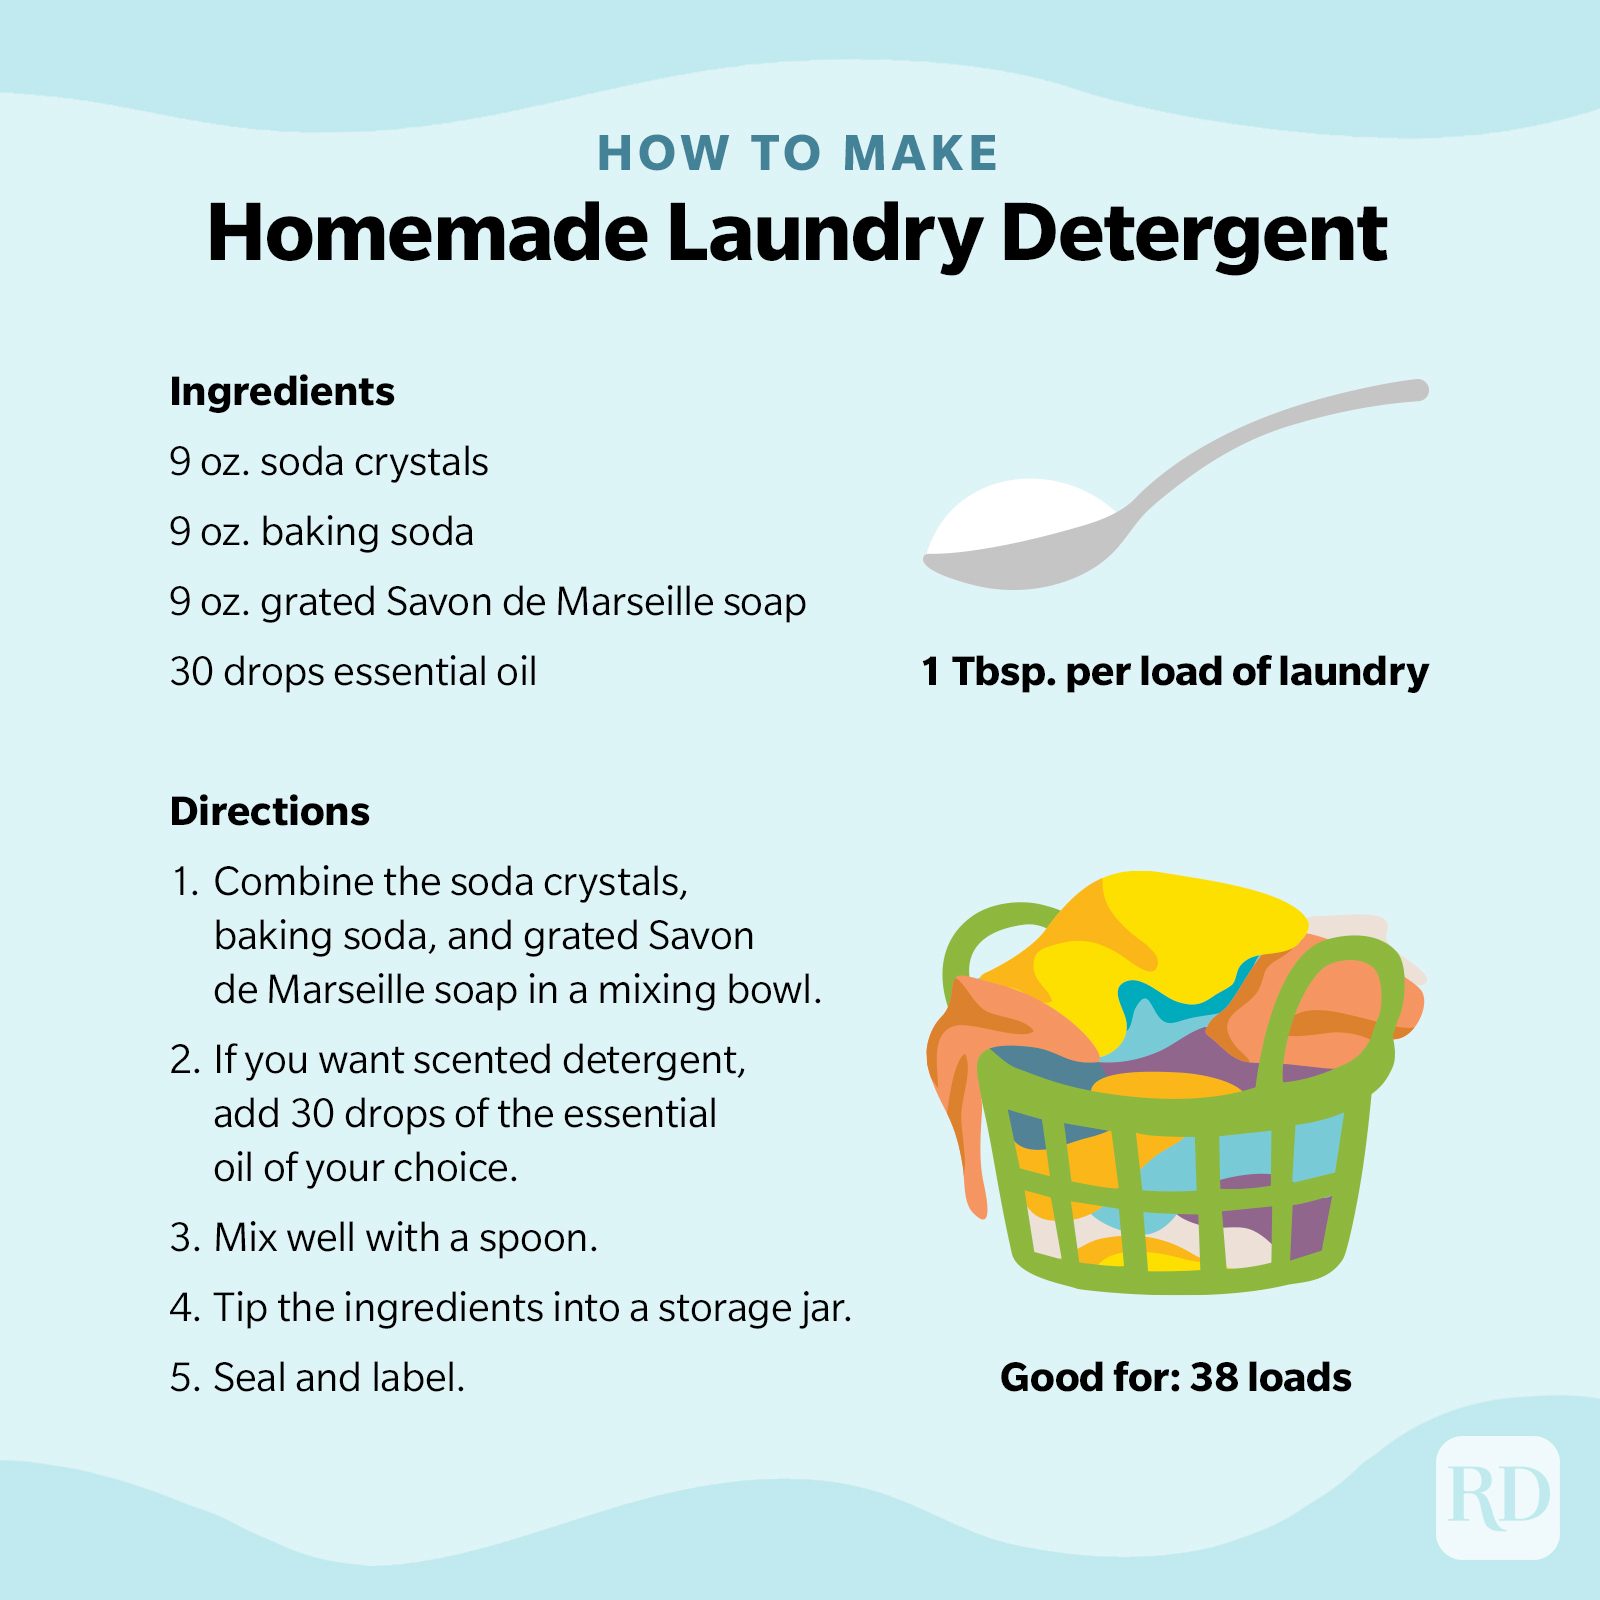 https://www.rd.com/wp-content/uploads/2022/02/RD-How-to-Make-Homemade-Laundry-Detergent-Infographic.jpg?fit=680%2C680